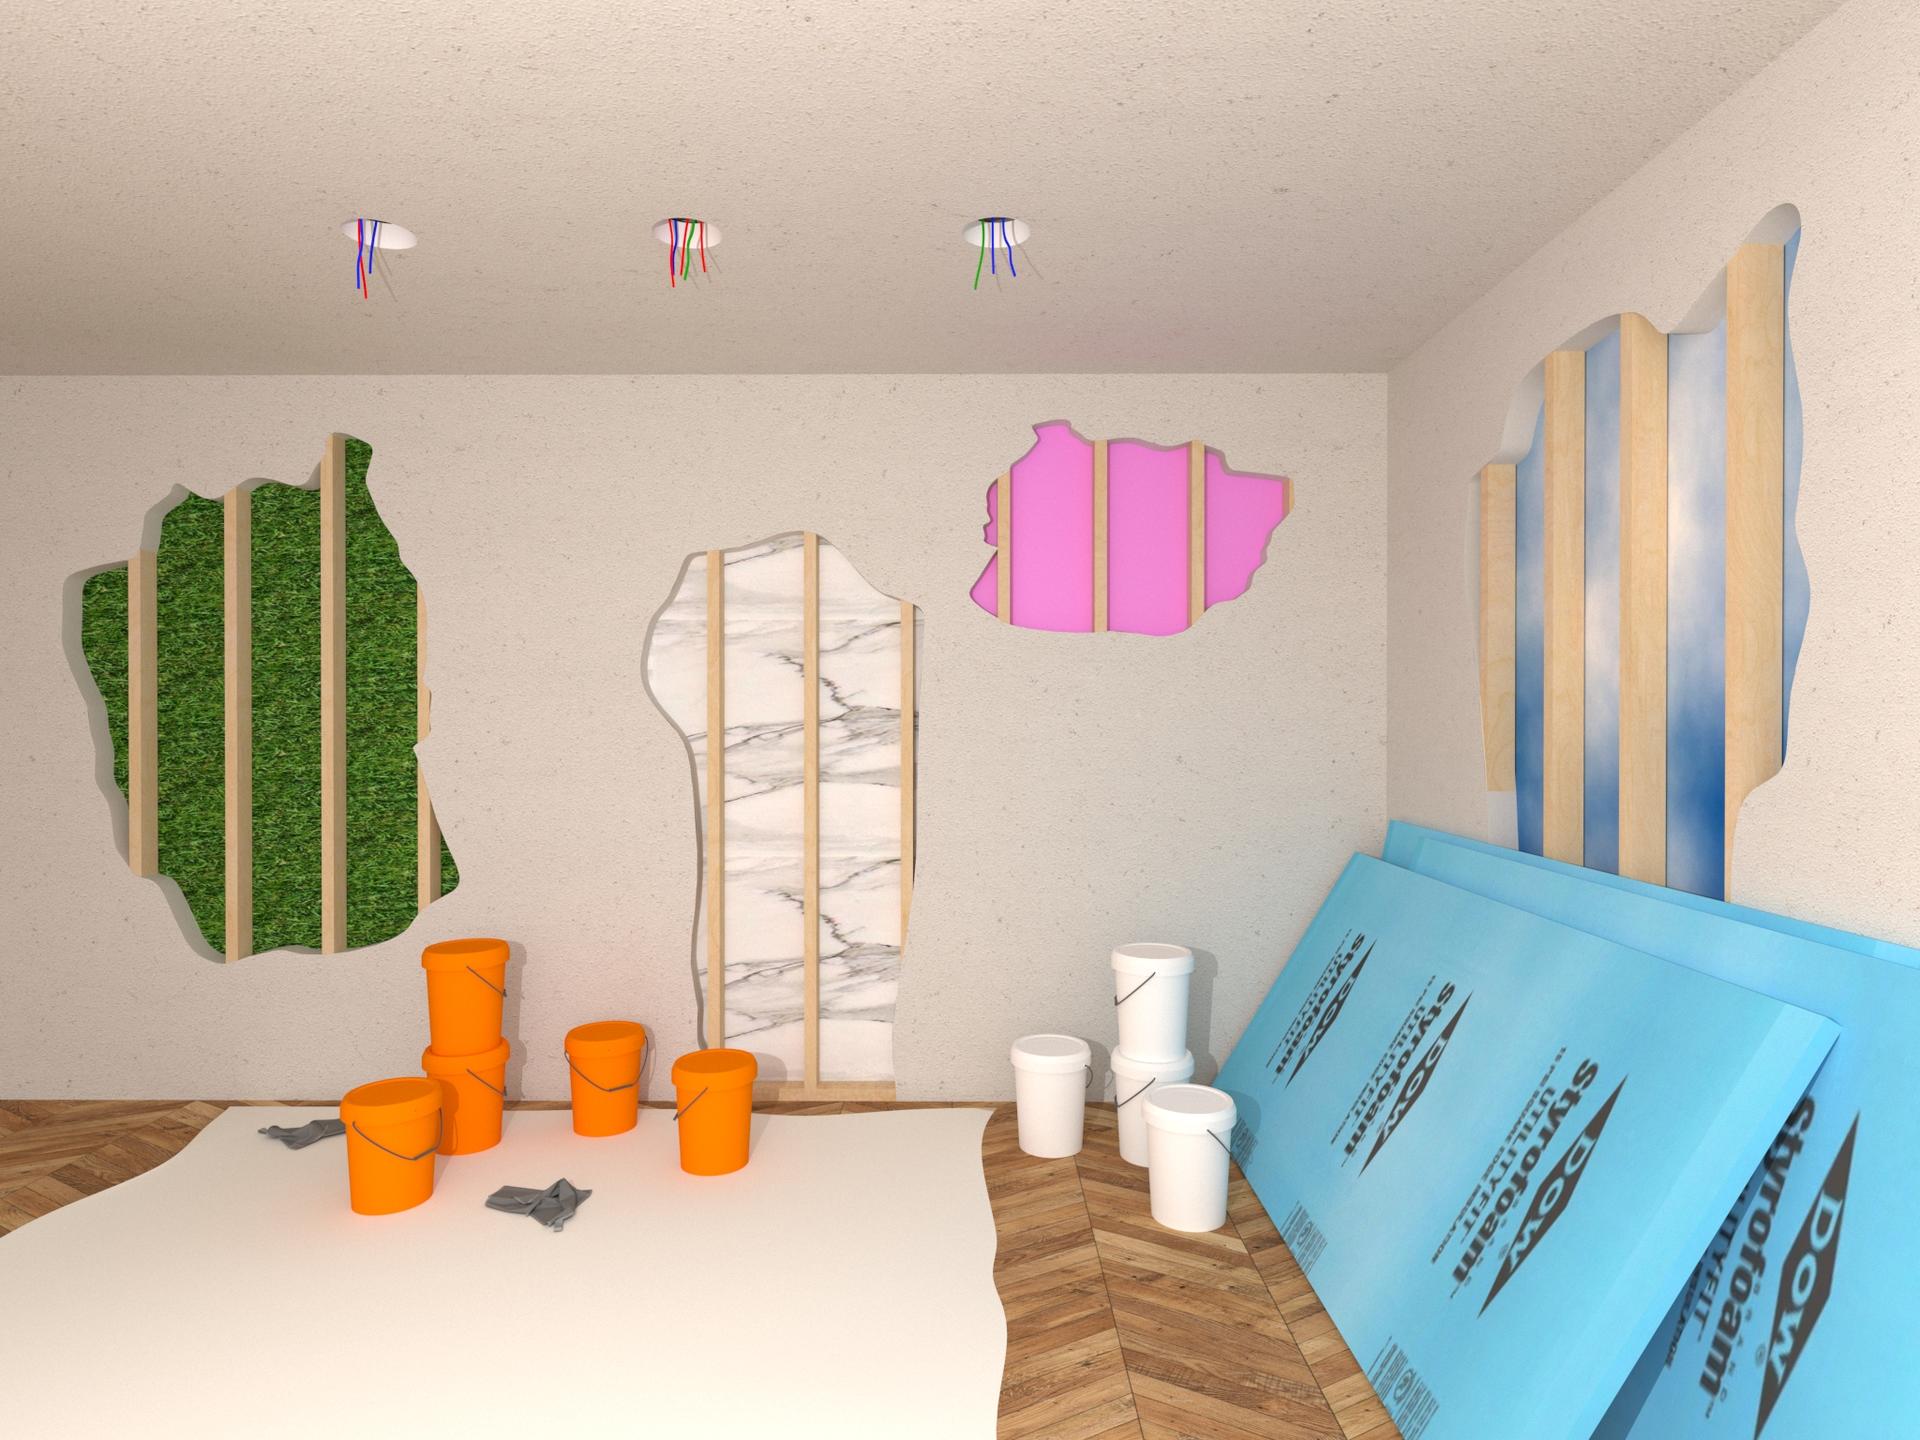 A scene of a room under construction with illogical materials within the walls.  